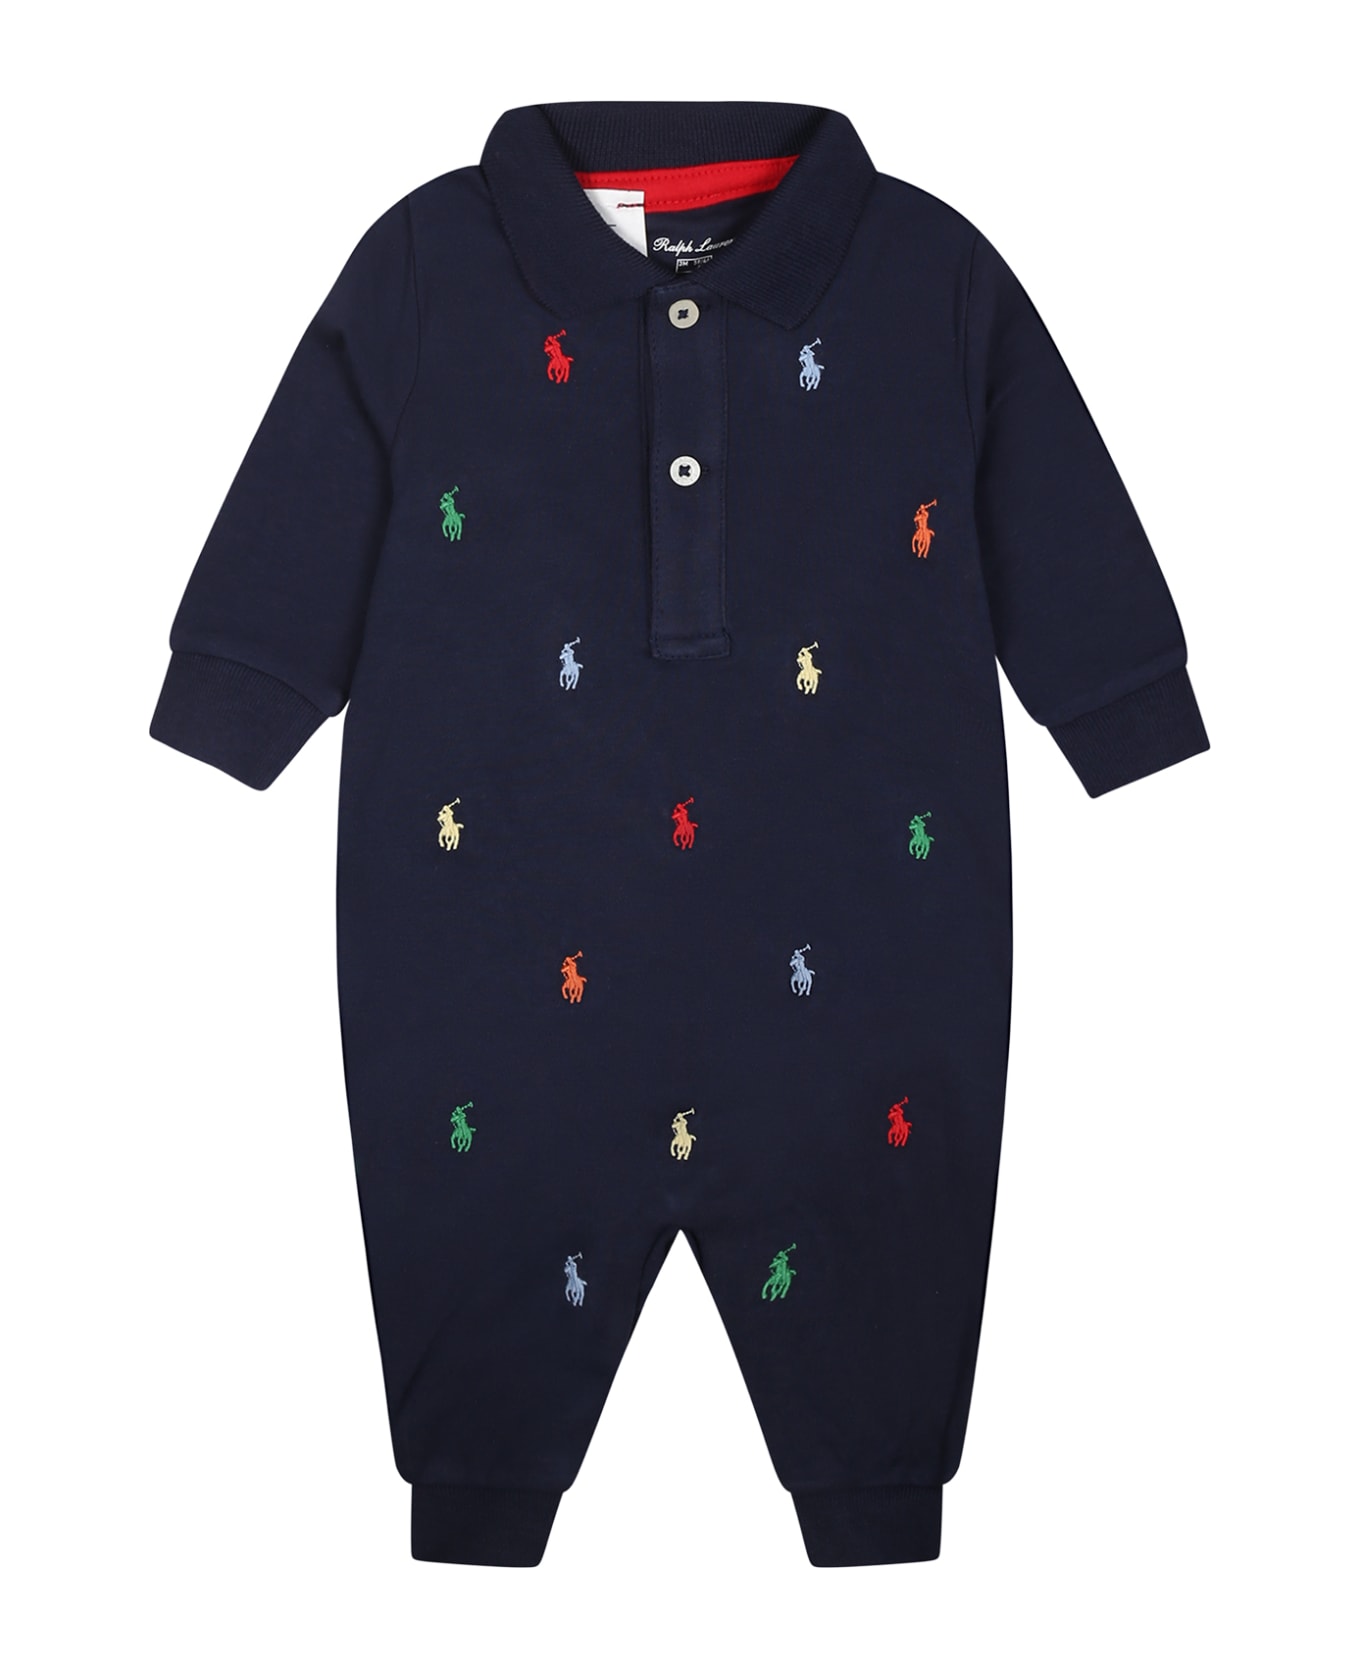 Ralph Lauren Blue Babygrow For Baby Boy With Pony - Blue